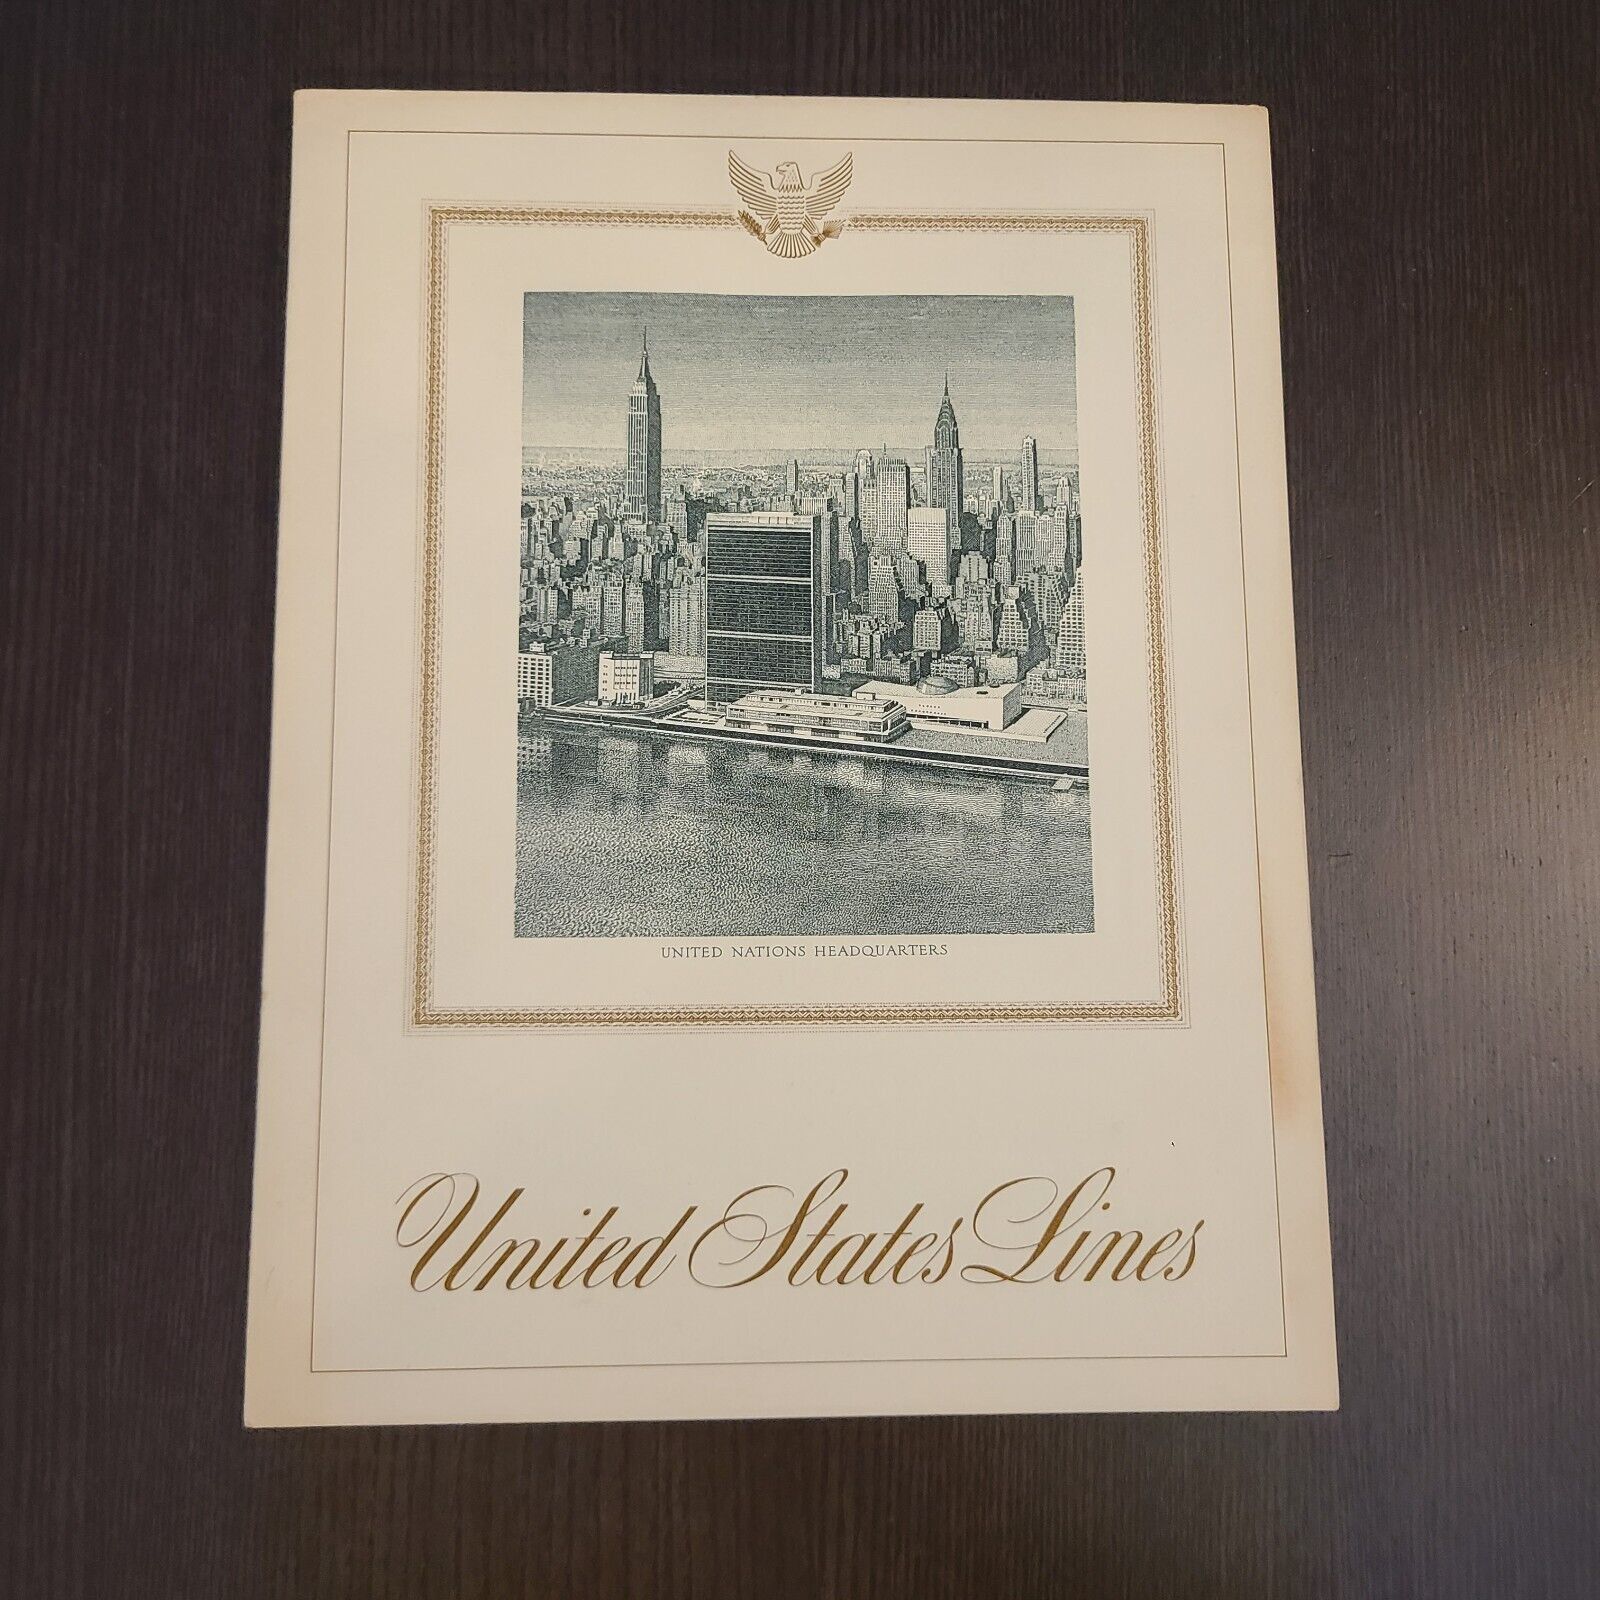 S.S. United States Dinner Menu (May 1st, 1964)